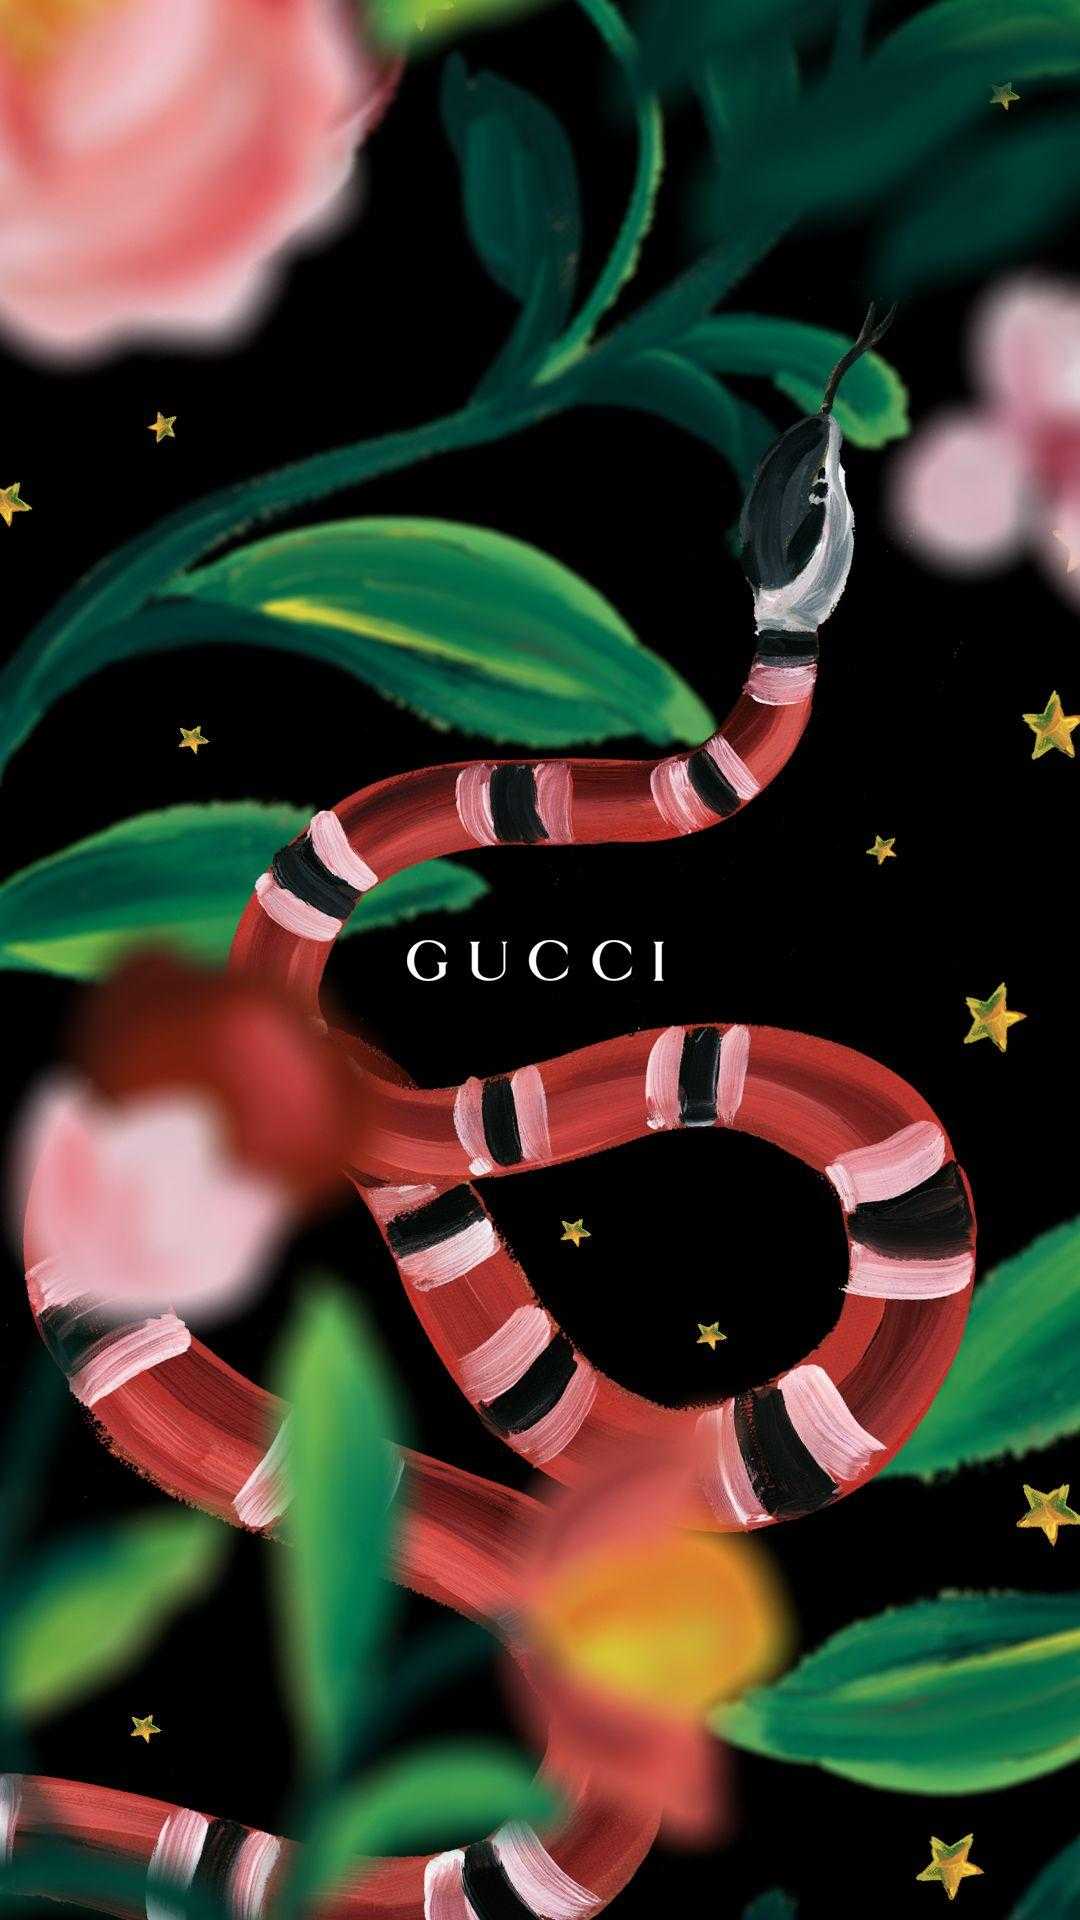 Gucci Louis Vuitton Supreme iPhone Wallpapers Free Download